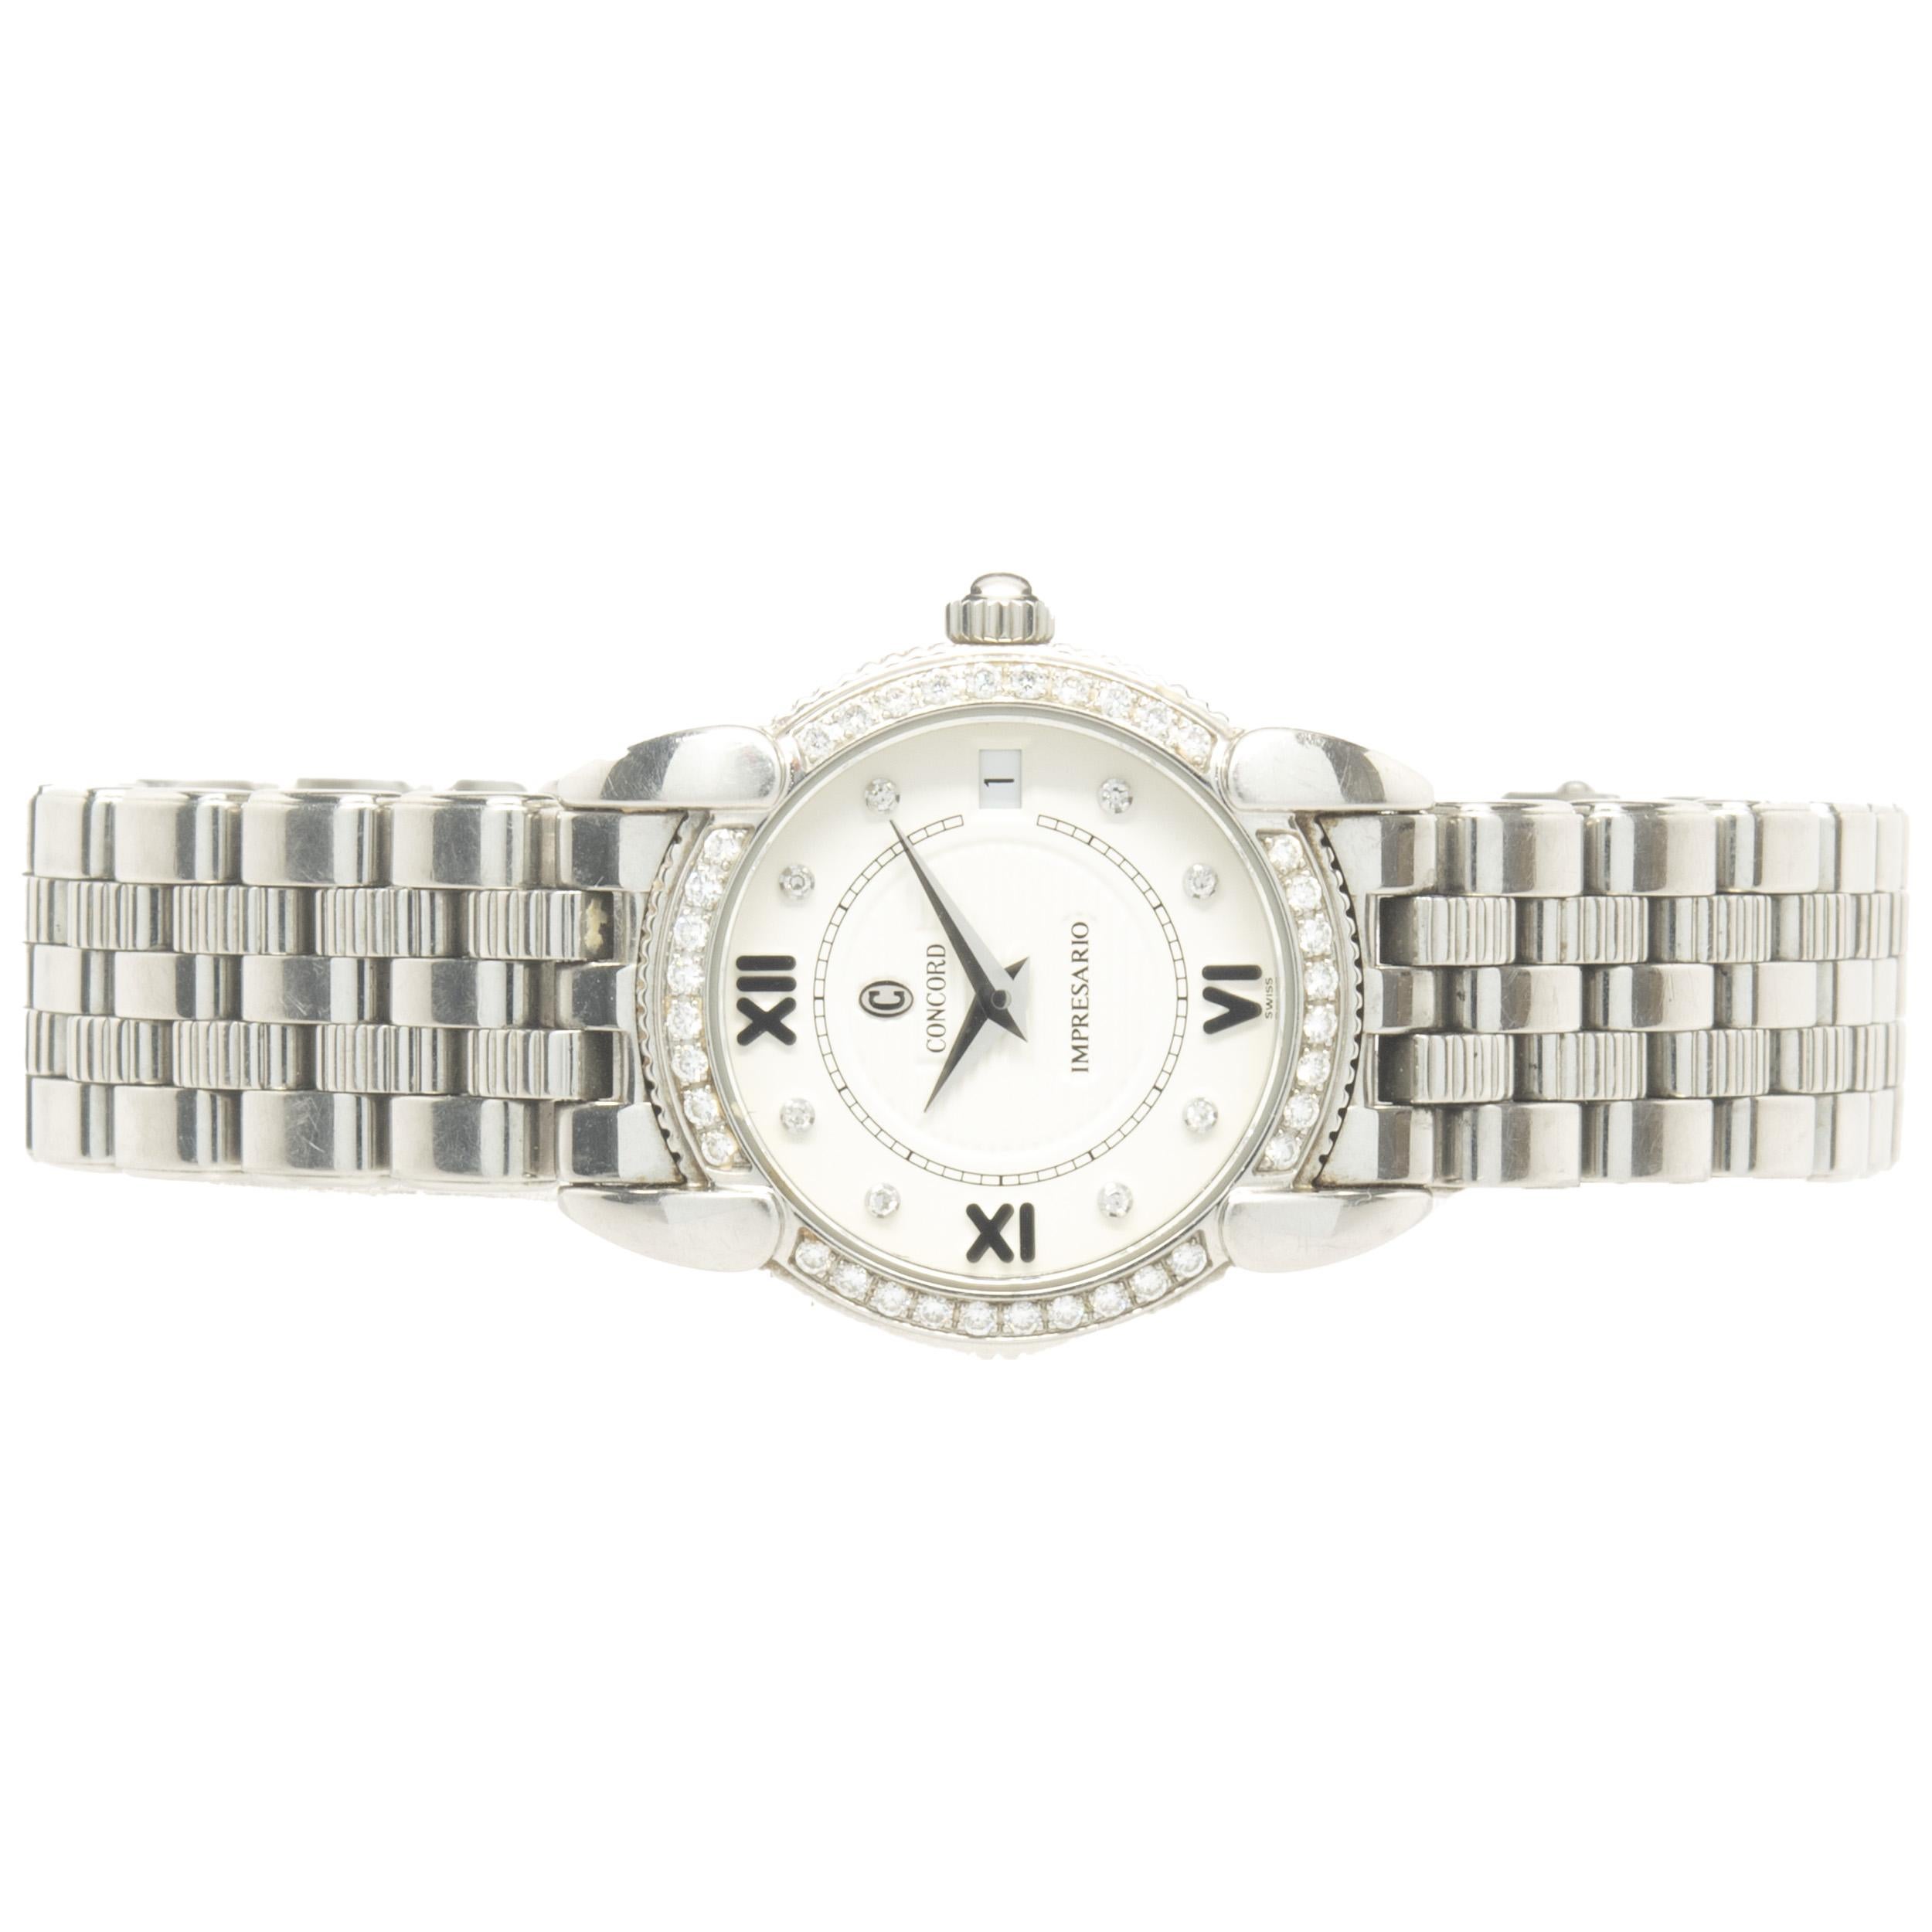 Movement: quartz
Function: hours, minutes, date
Case: 25mm round case, diamond bezel, sapphire crystal, pull/push crown, water resistant
Dial: white, diamond
Band: Concord stainless steel bracelet, integrated clasp
Serial#: 14E12XXX
Reference #